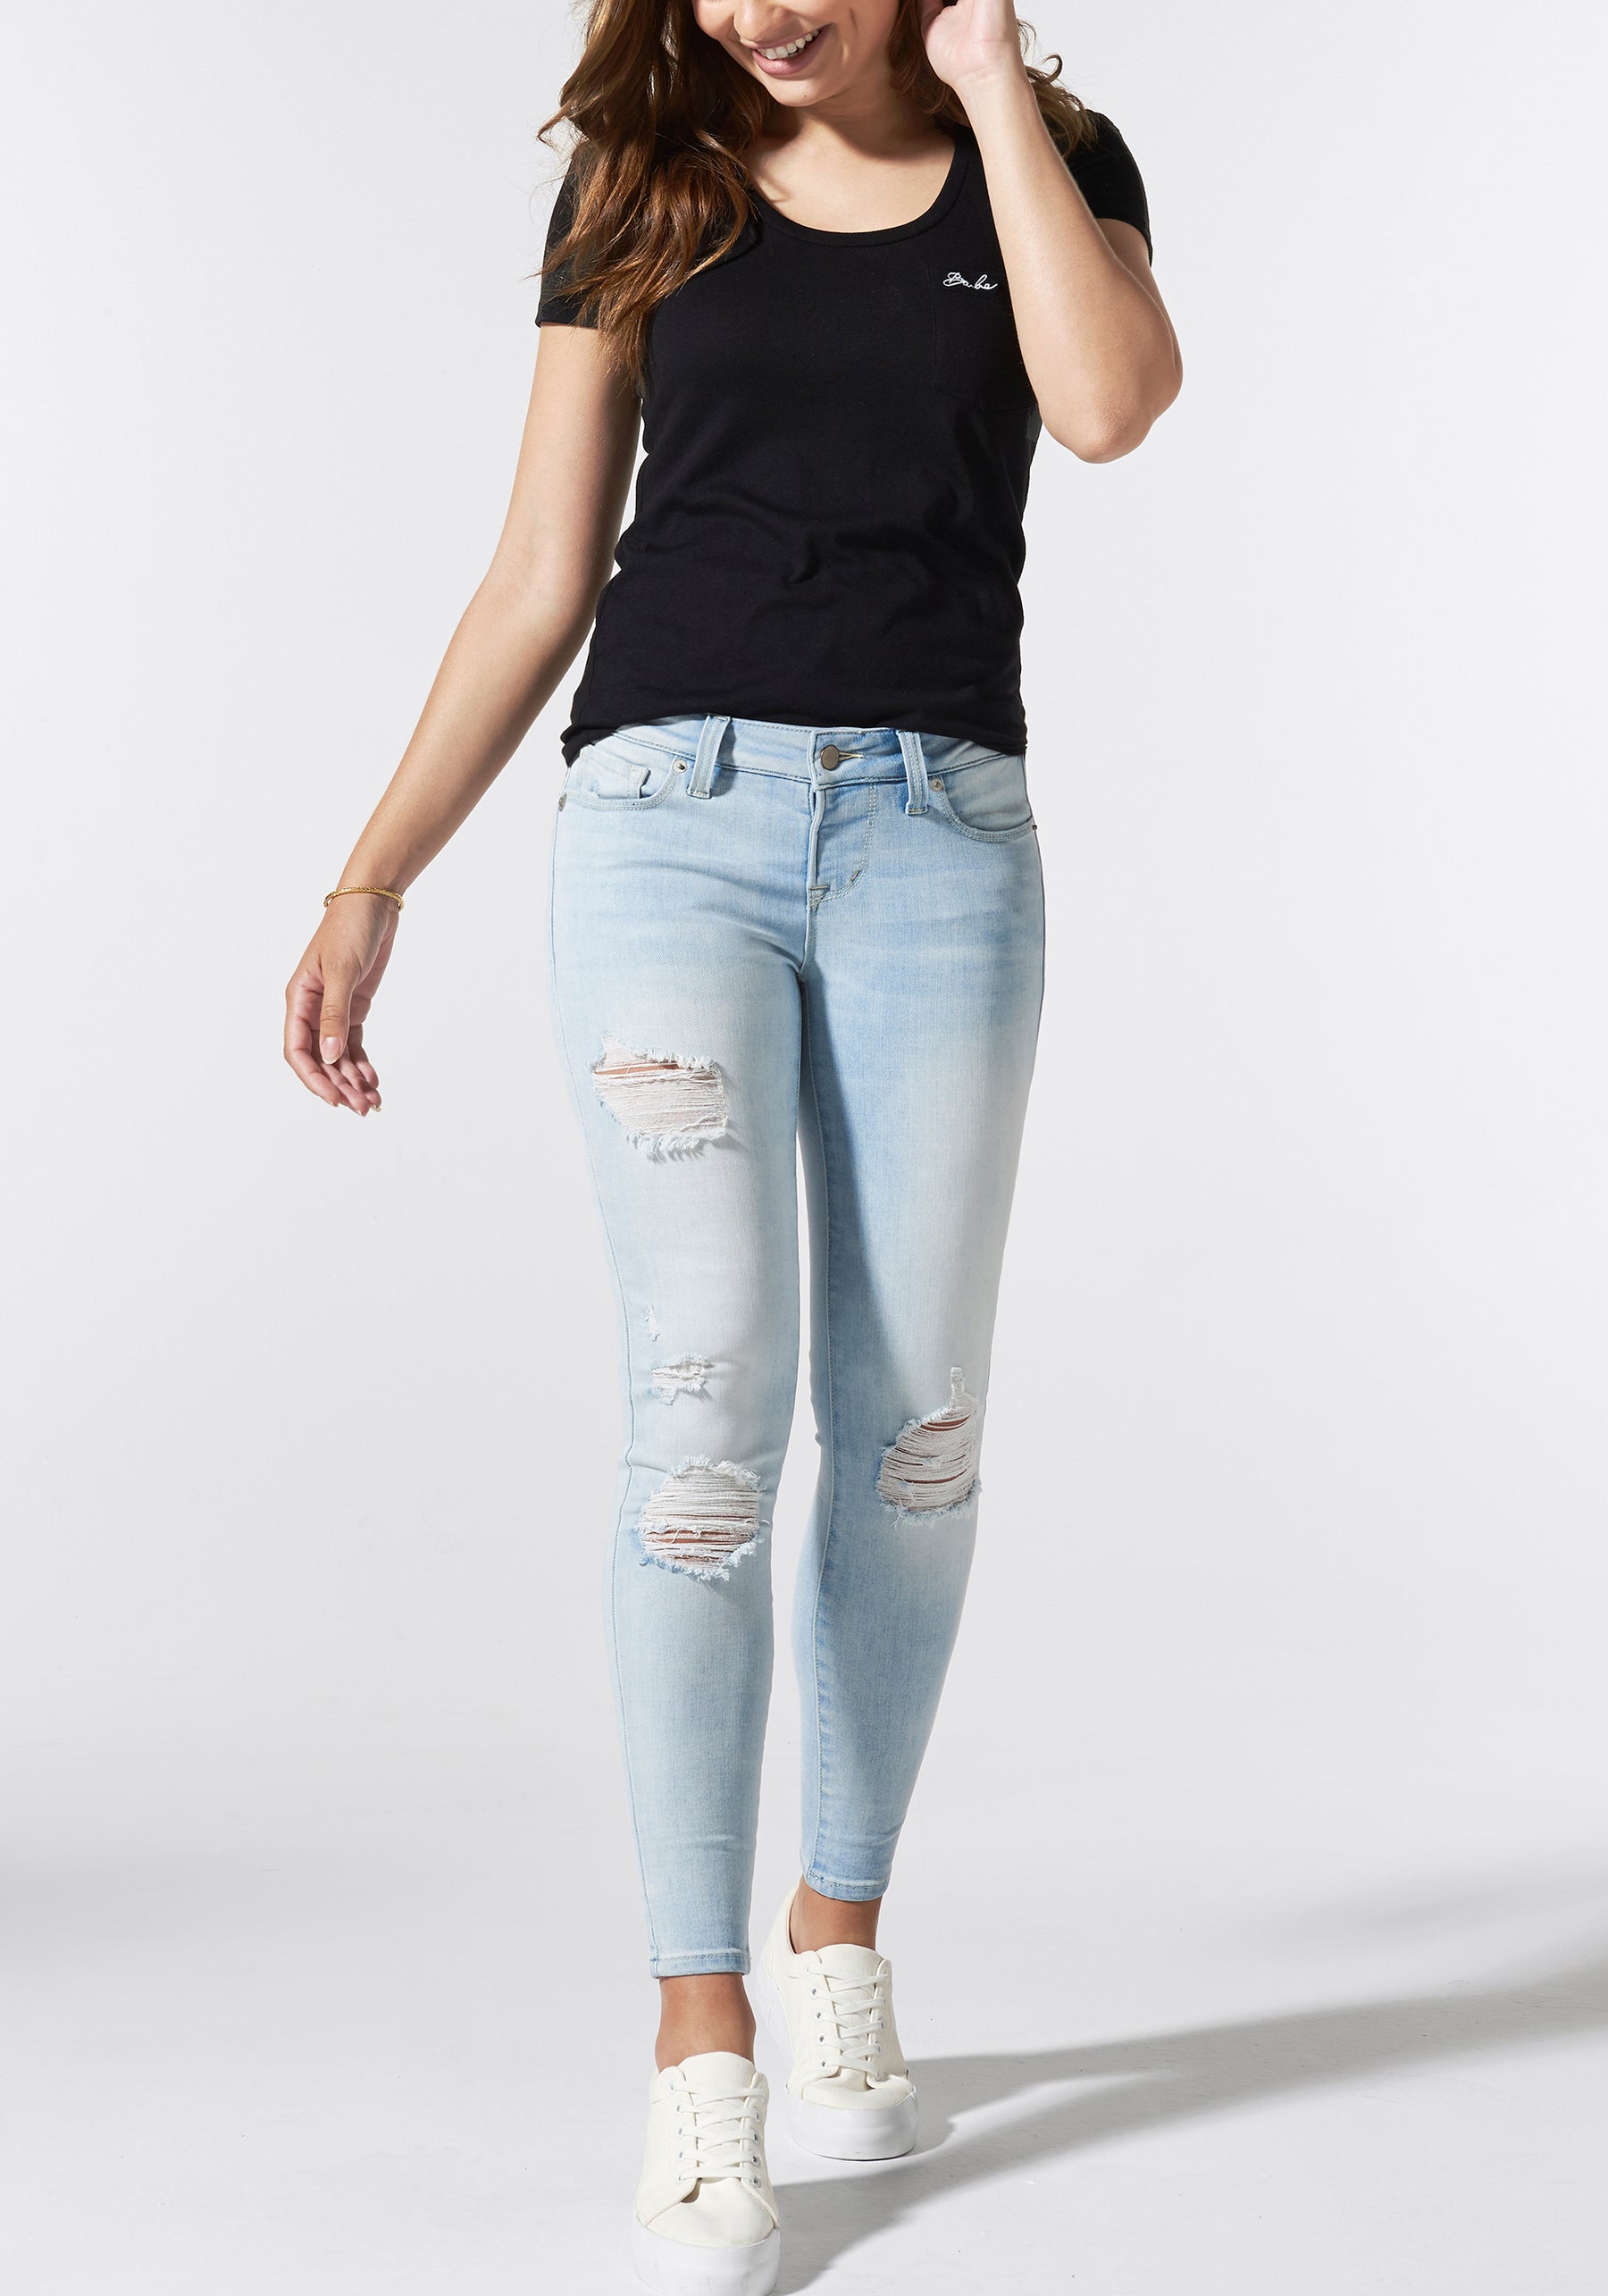 Best Postpartum Jeans: Style and Comfort for Every Body